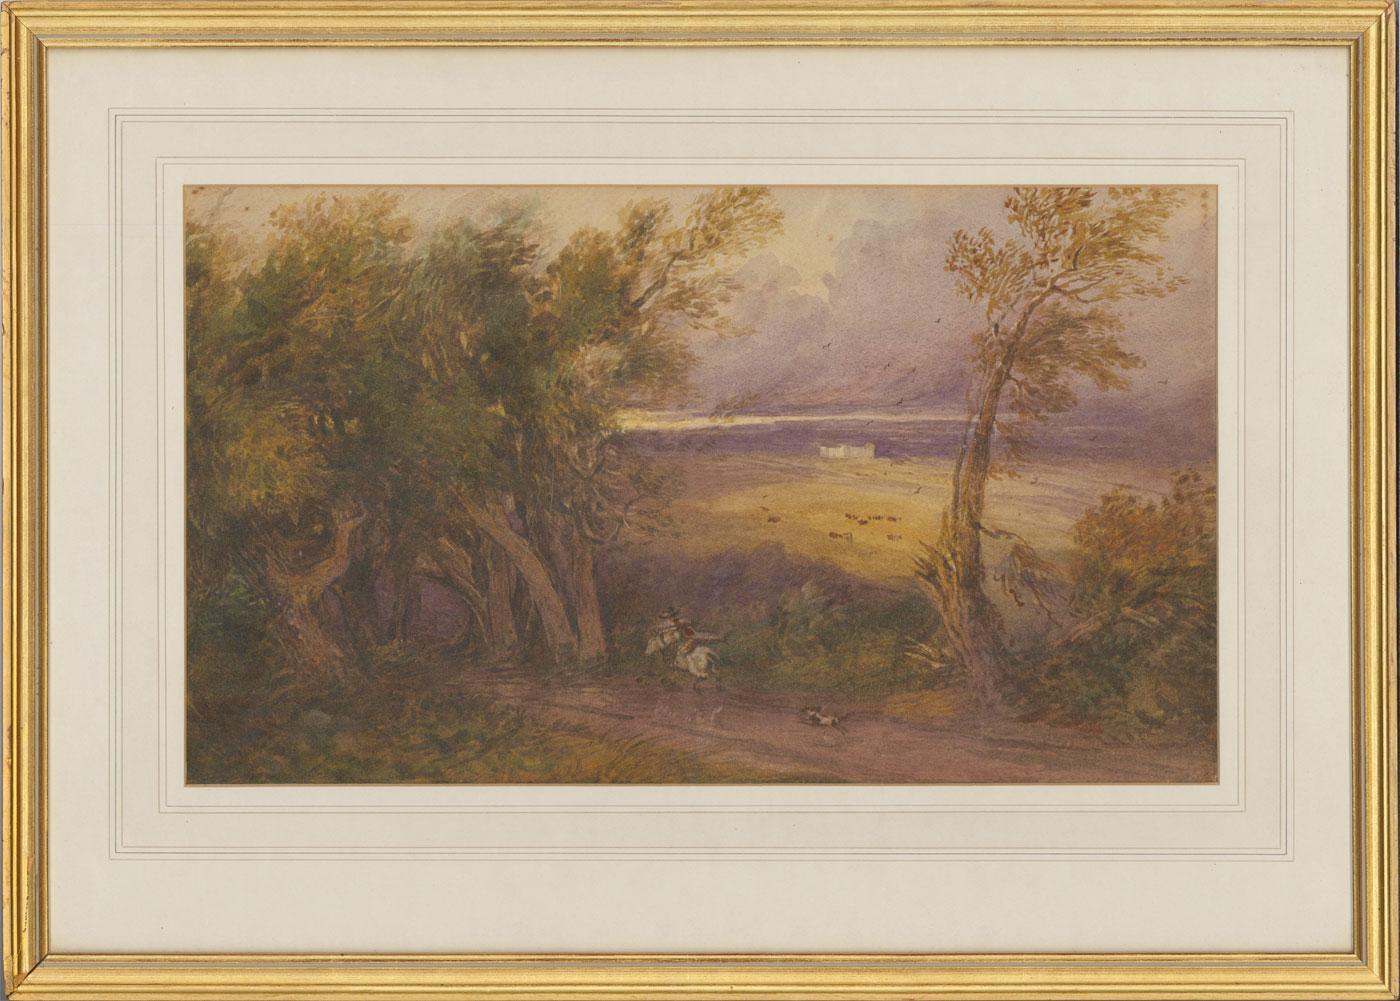 A finely composed landscape in watercolour by the listed artist David Cox Junior ARWS (1809-1885). Cox has depicted a rider charging through a rural lane towards a cavern of trees, with his faithful dog running behind.The proficiency of the artist